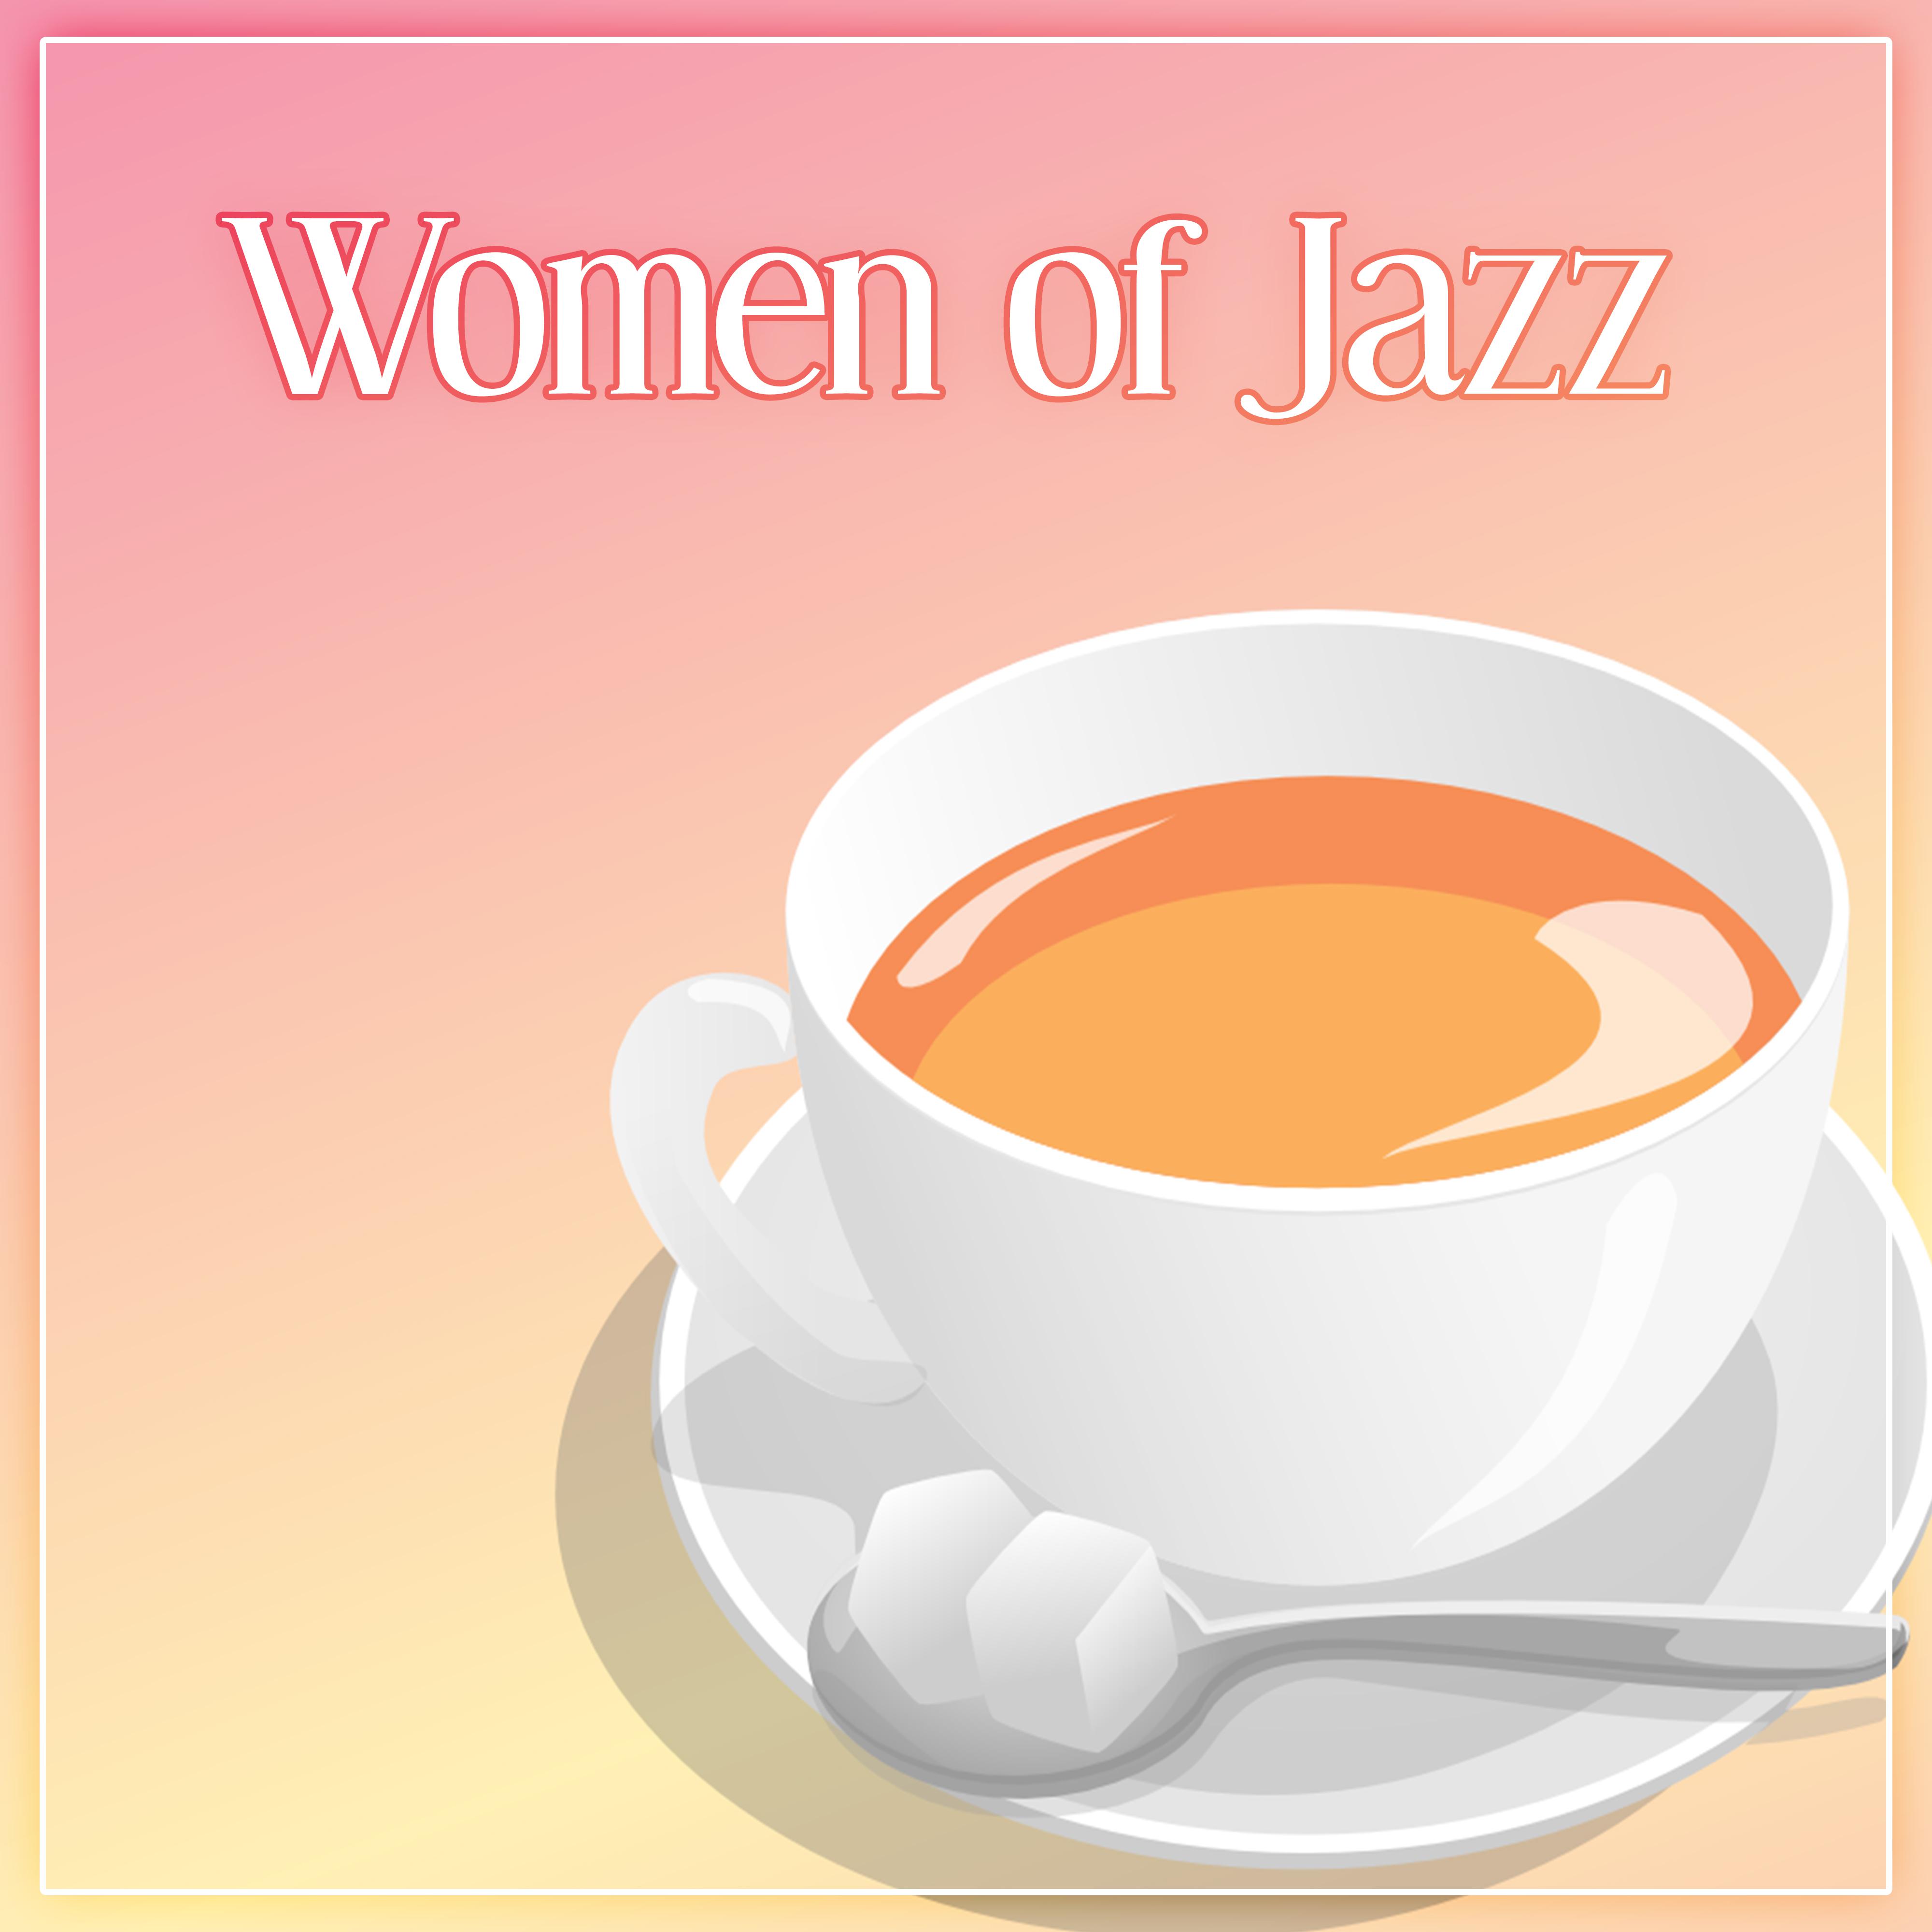 Women of Jazz  Soothing Sounds of Jazz Music like a Soft Pillow, Relax Time, Good Sleep, Chilled Jazz, Background Music for Relaxation, Calming Piano Sounds, Jazz Music